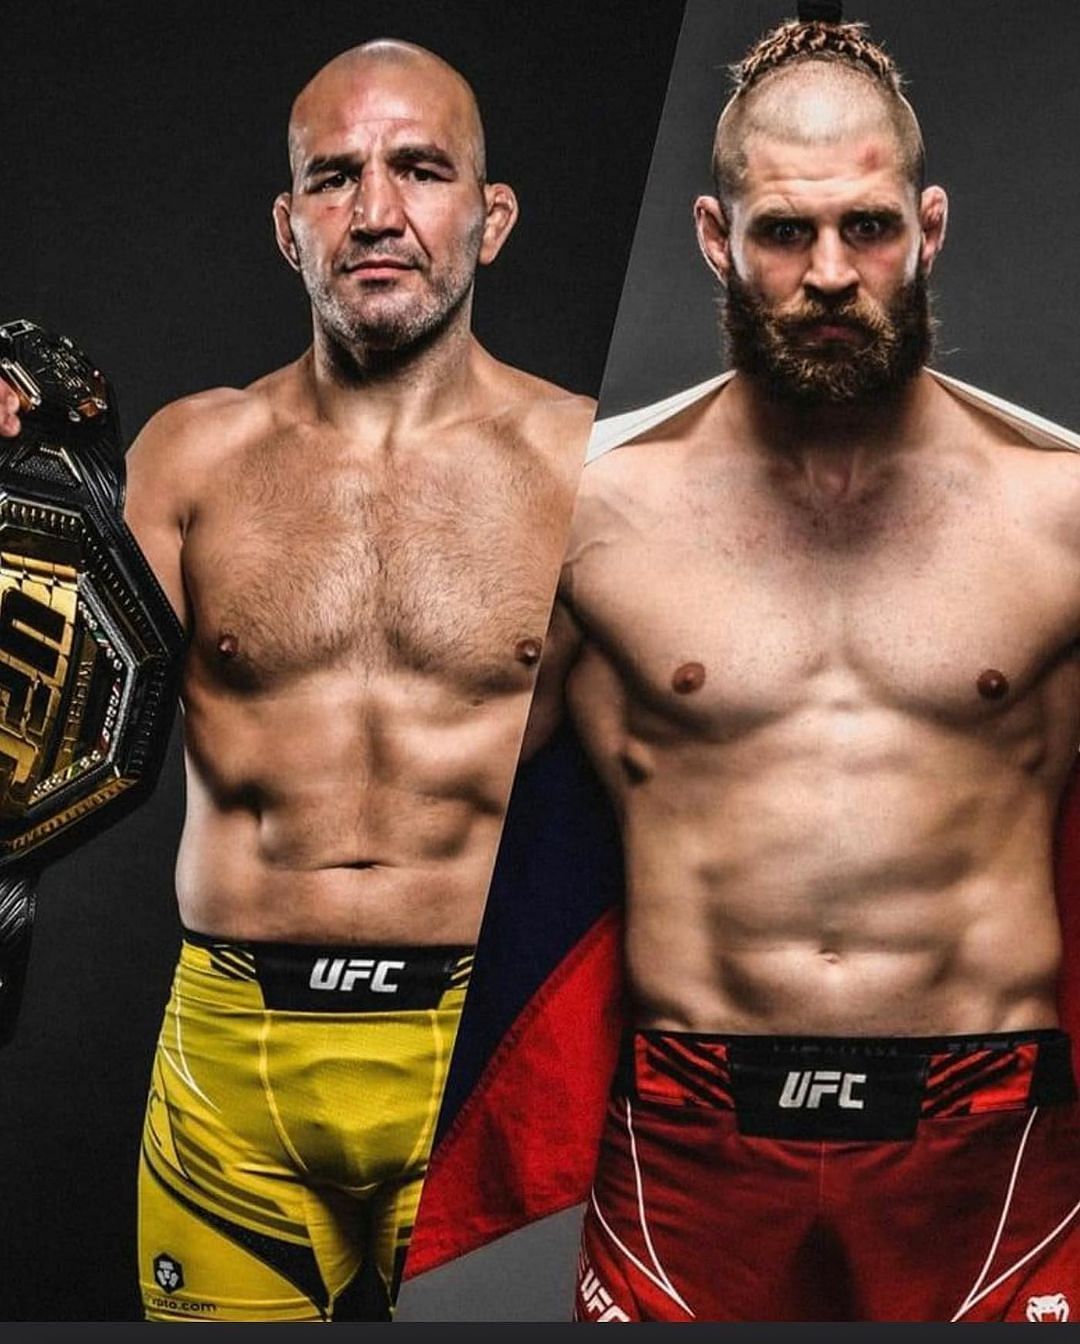 Glover Texeira will look to defend his title on June 11th [Image via @glovertexeira on Instagram]